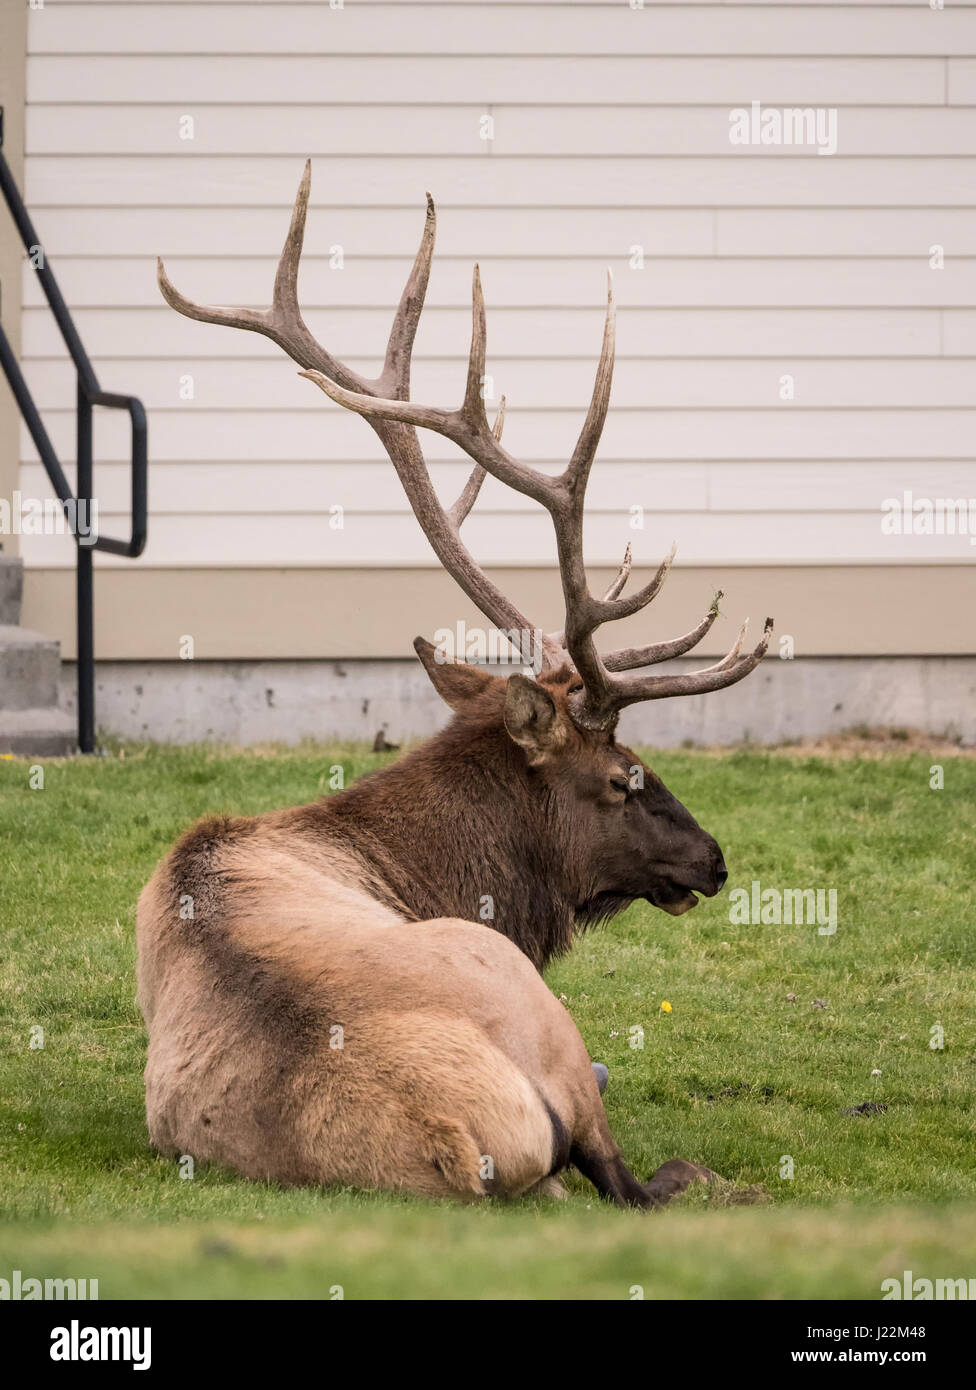 Bull elk vocalizing / bugling near the Mammoth Hot Springs Hotel in Yellowstone National Park, Wyoming, USA.  A bull may bugle to show off for cows, a Stock Photo